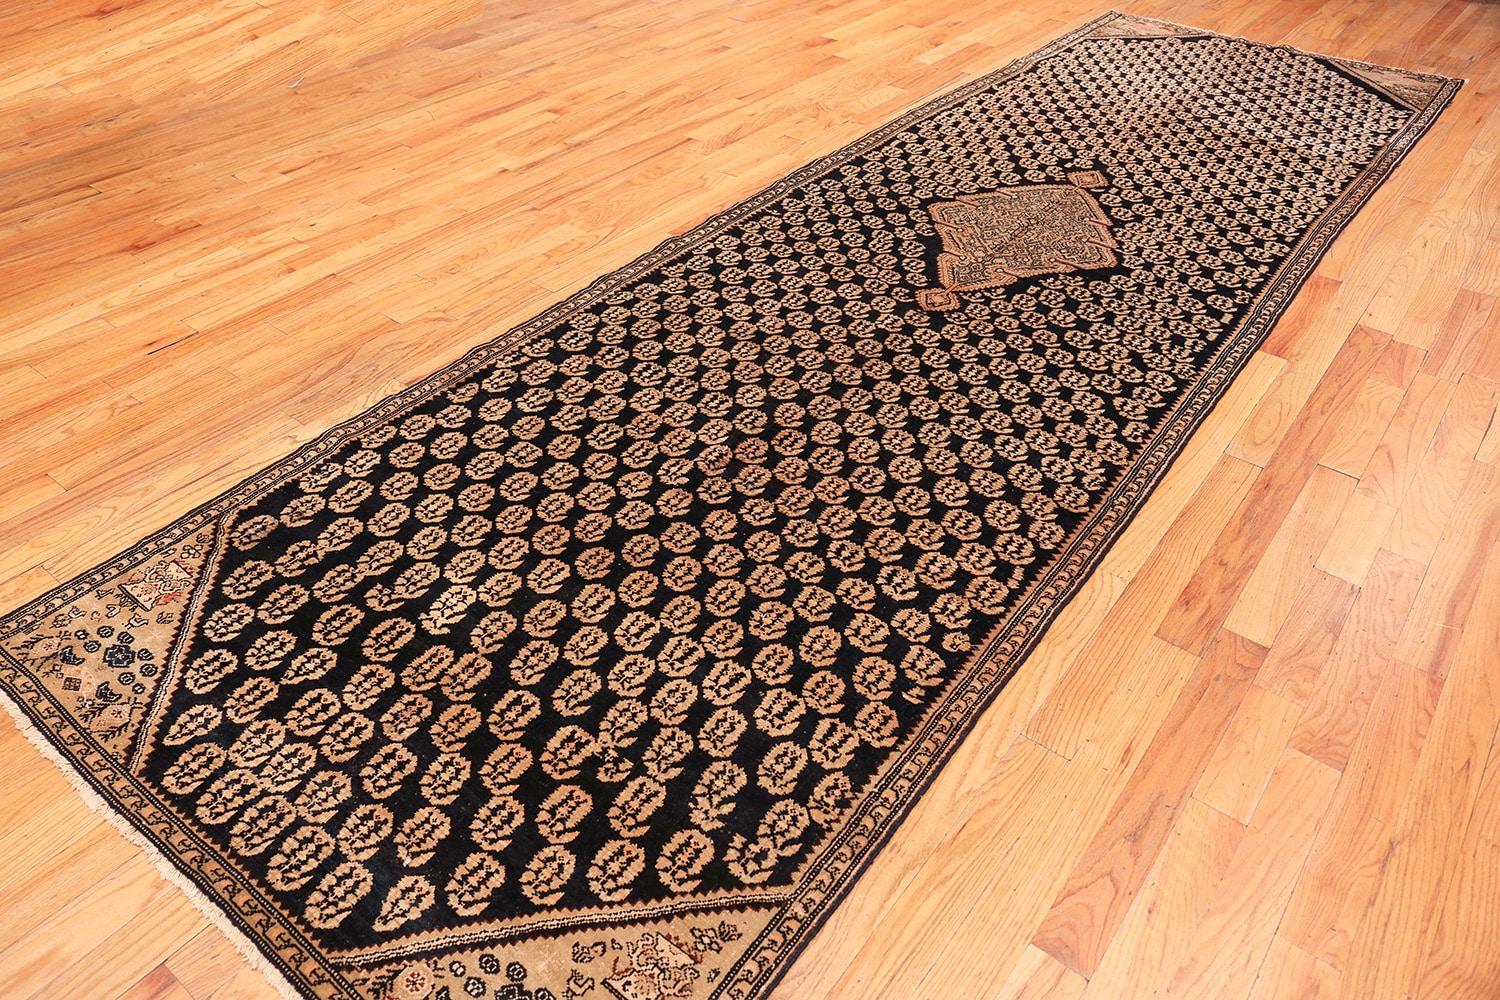 20th Century Antique Persian Malayer Runner. Size: 4 ft 7 in x 15 ft 3 in (1.4 m x 4.65 m)